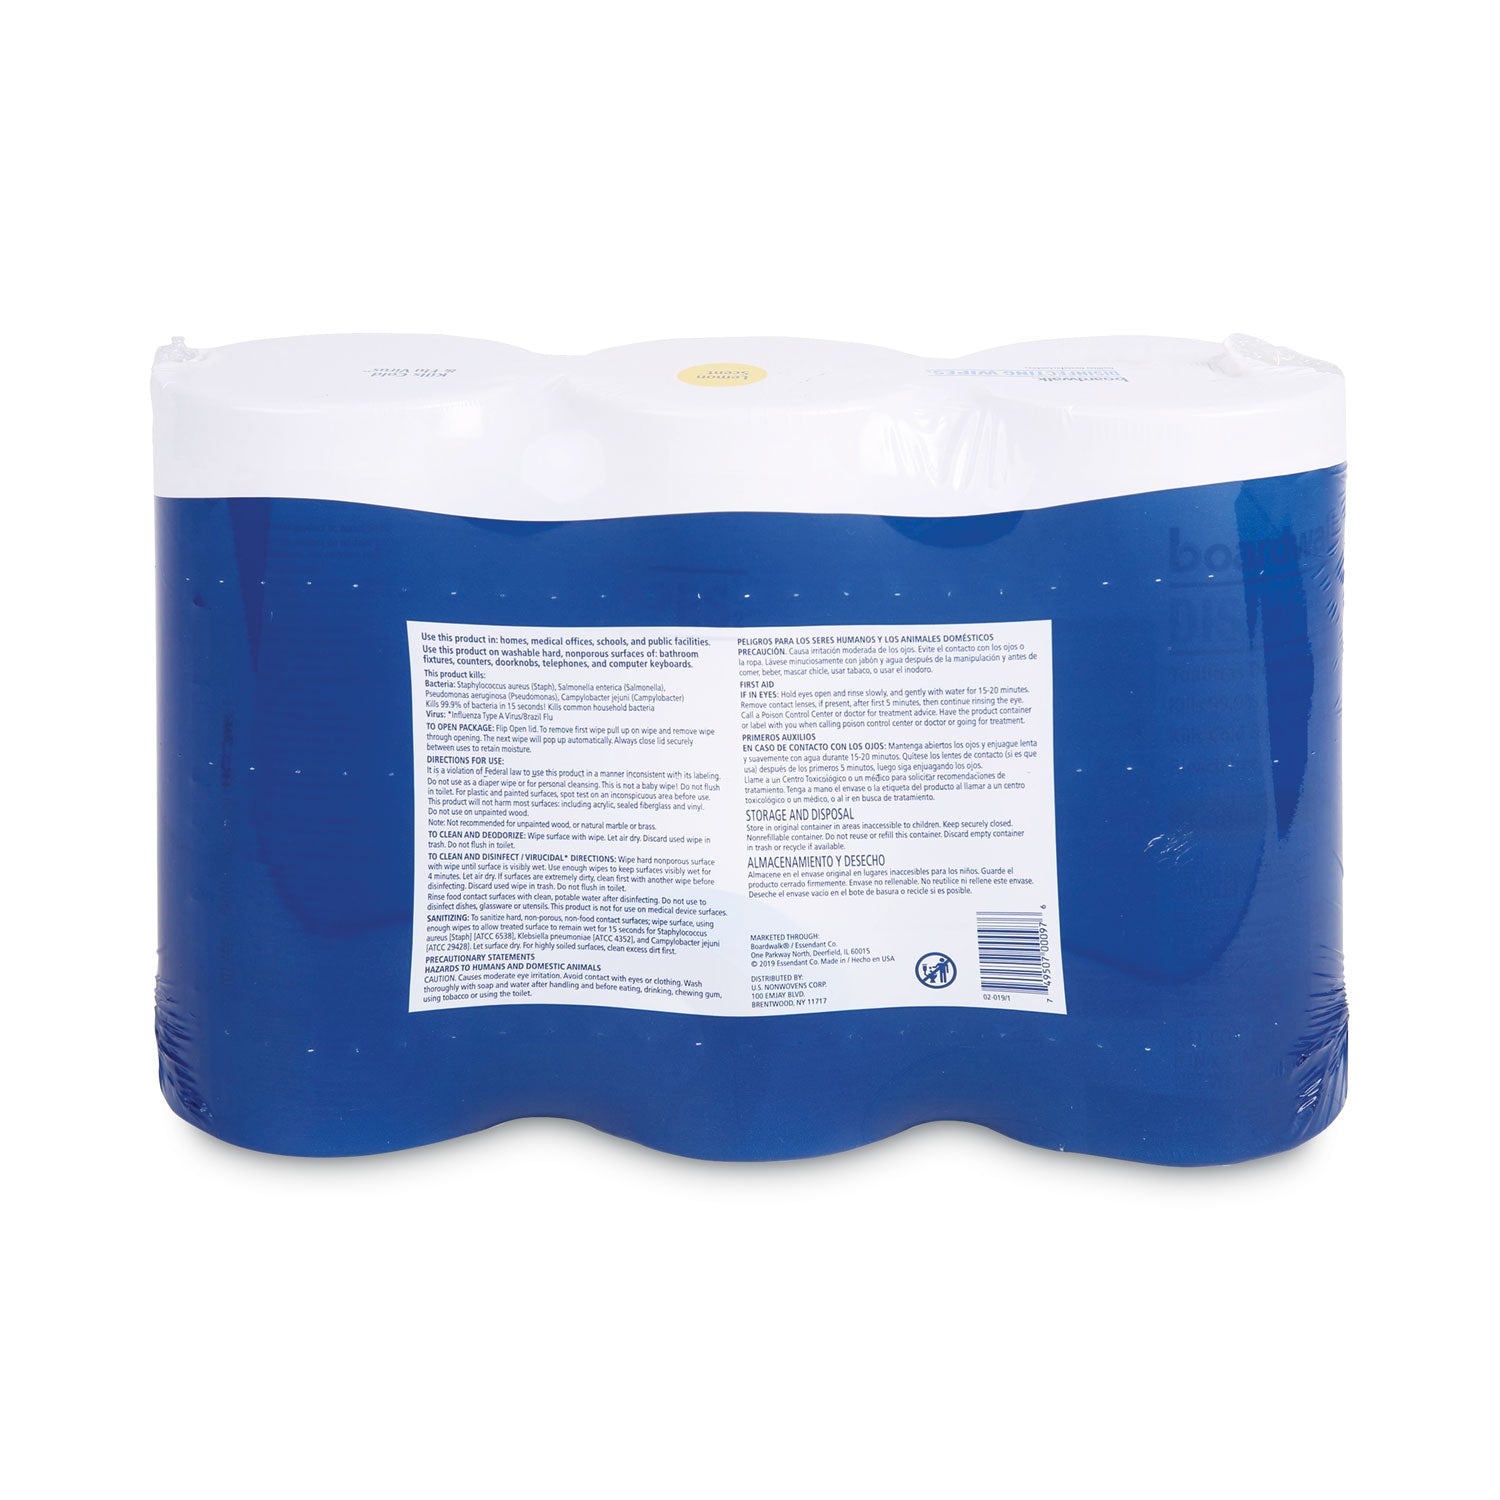 disinfecting-wipes-7-x-8-lemon-scent-75-canister-12-canisters-carton_bwk455w753ct - 7